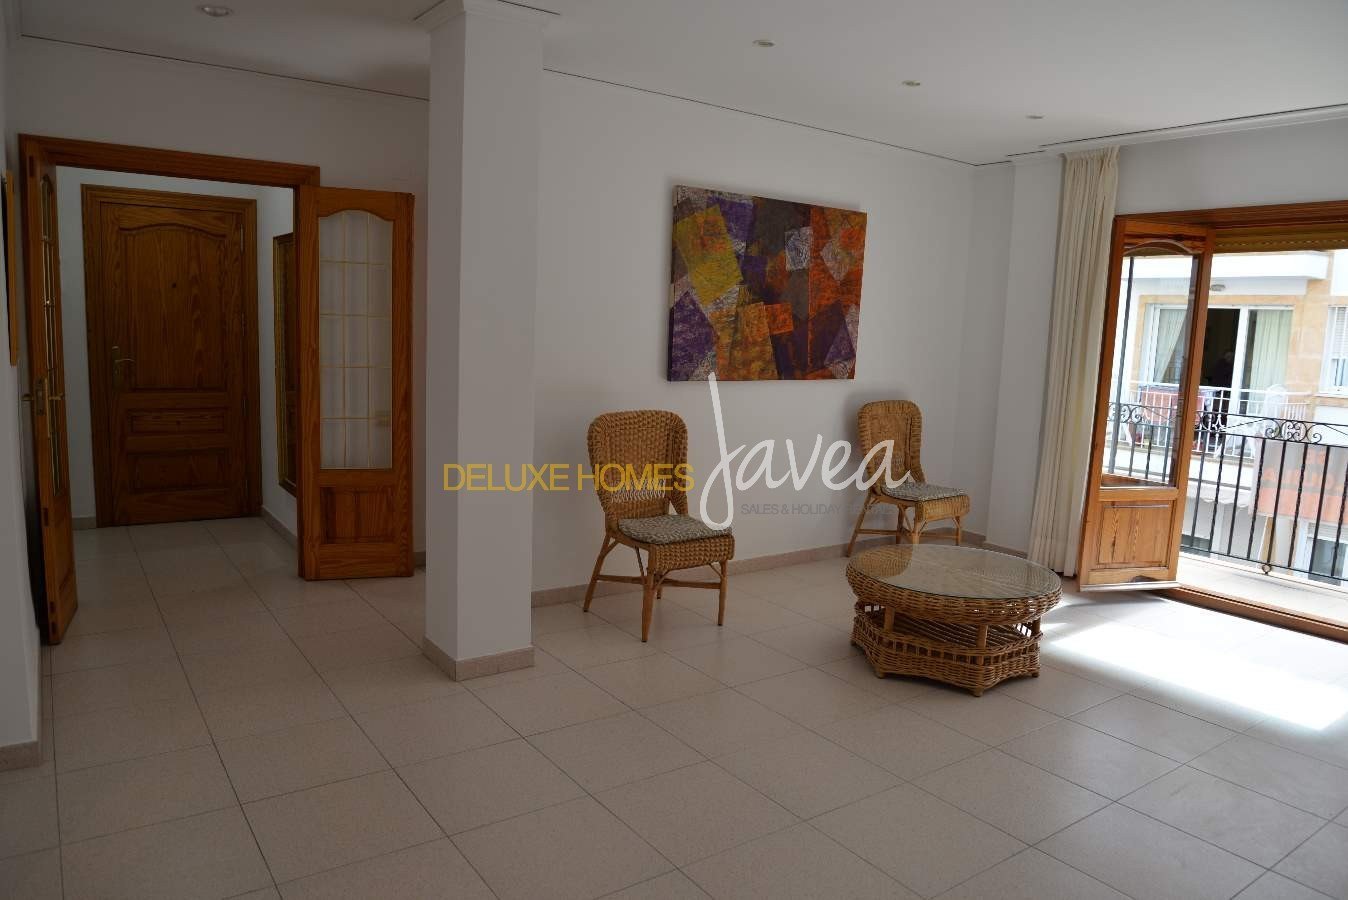 3 Bedroom 2 bathroom apartment in the heart of the Port, Jávea